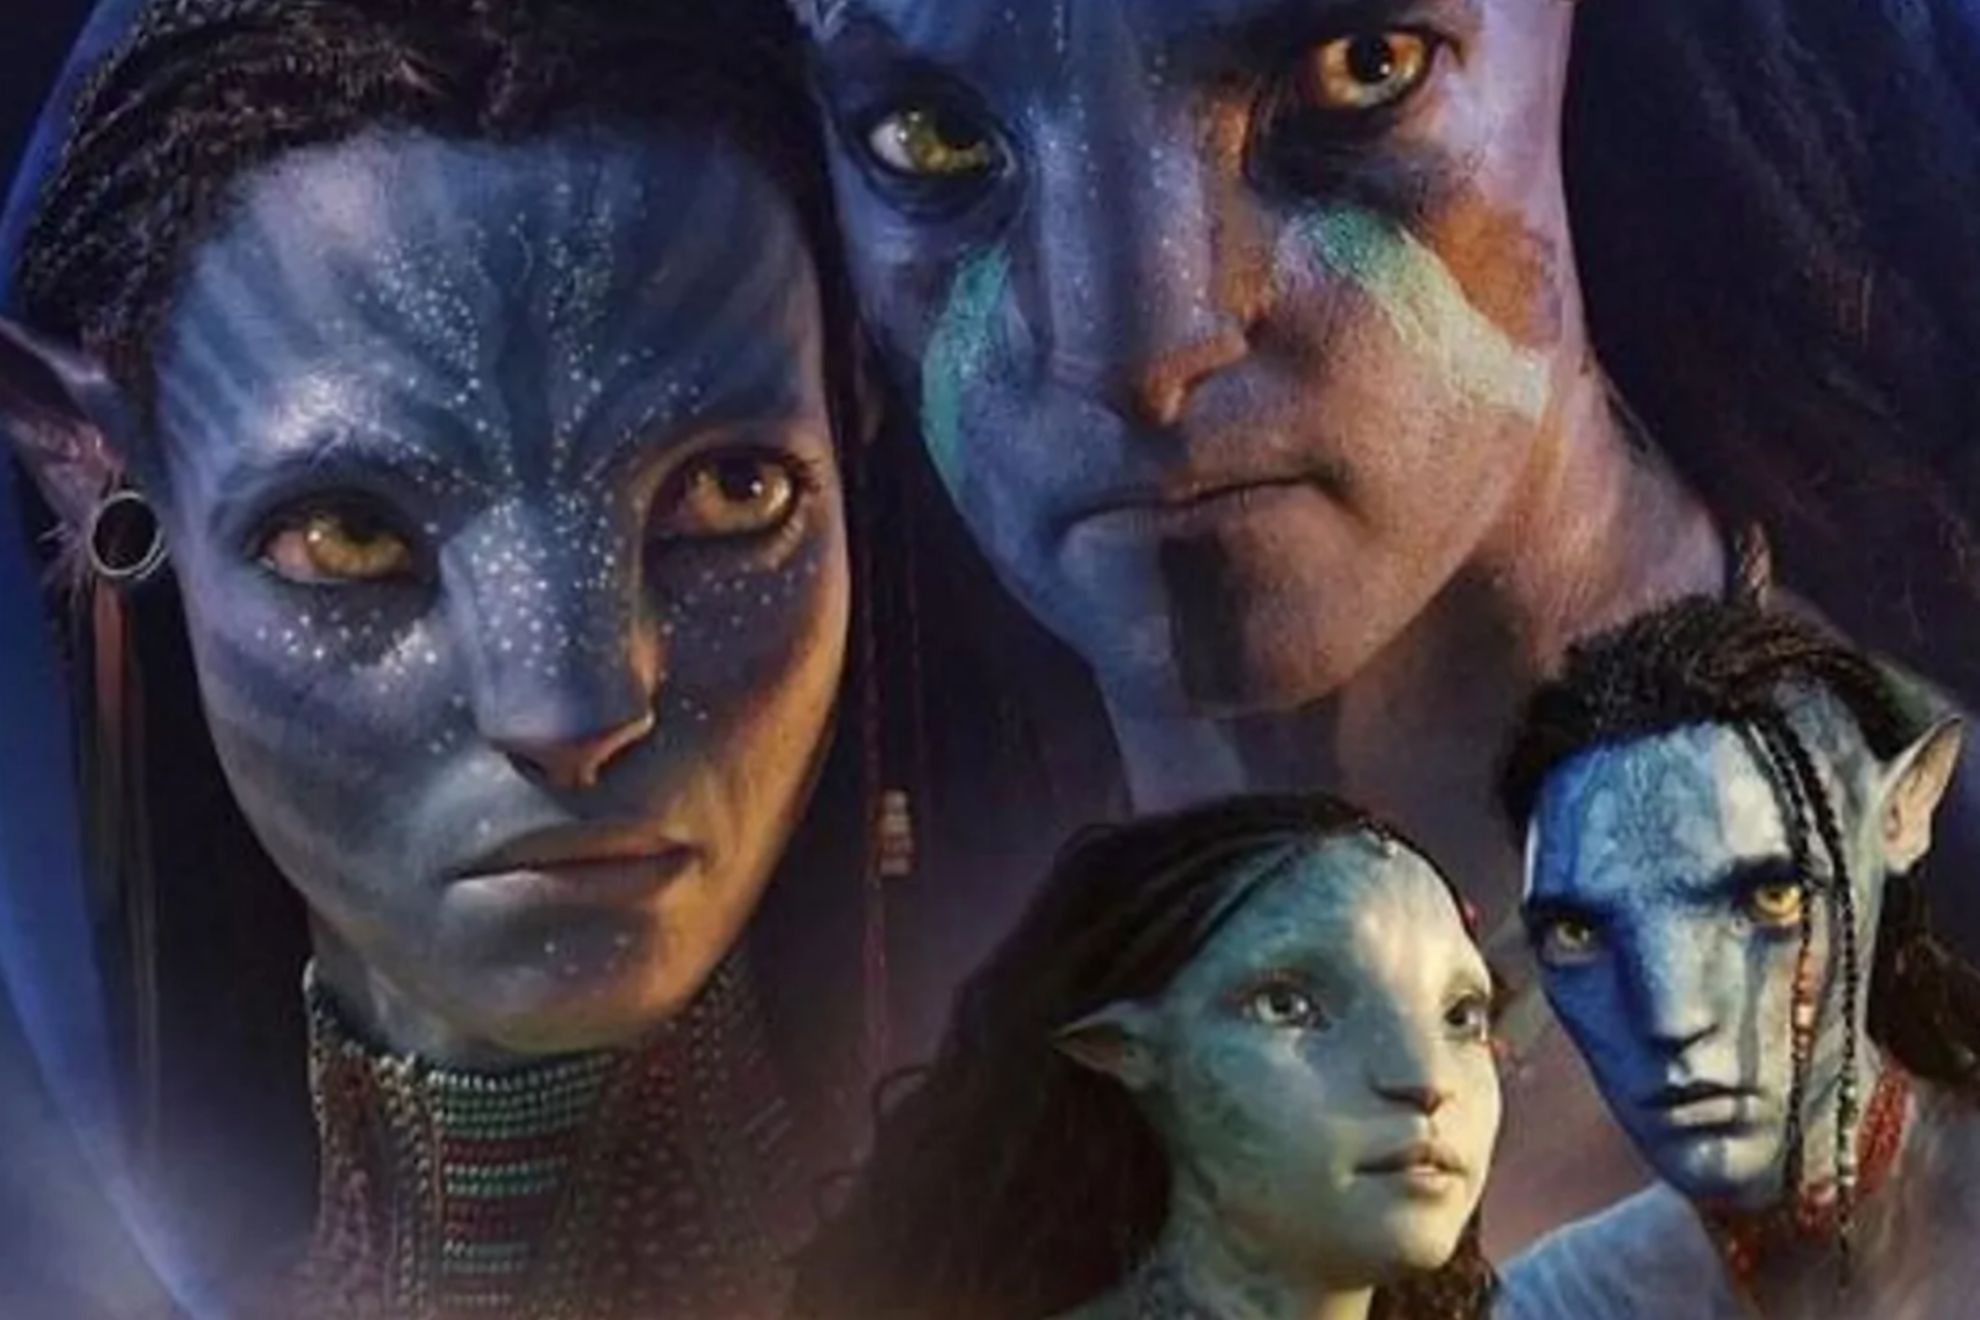 Complete Avatar 2 Cast All the Actors Appearing in The Way of Water